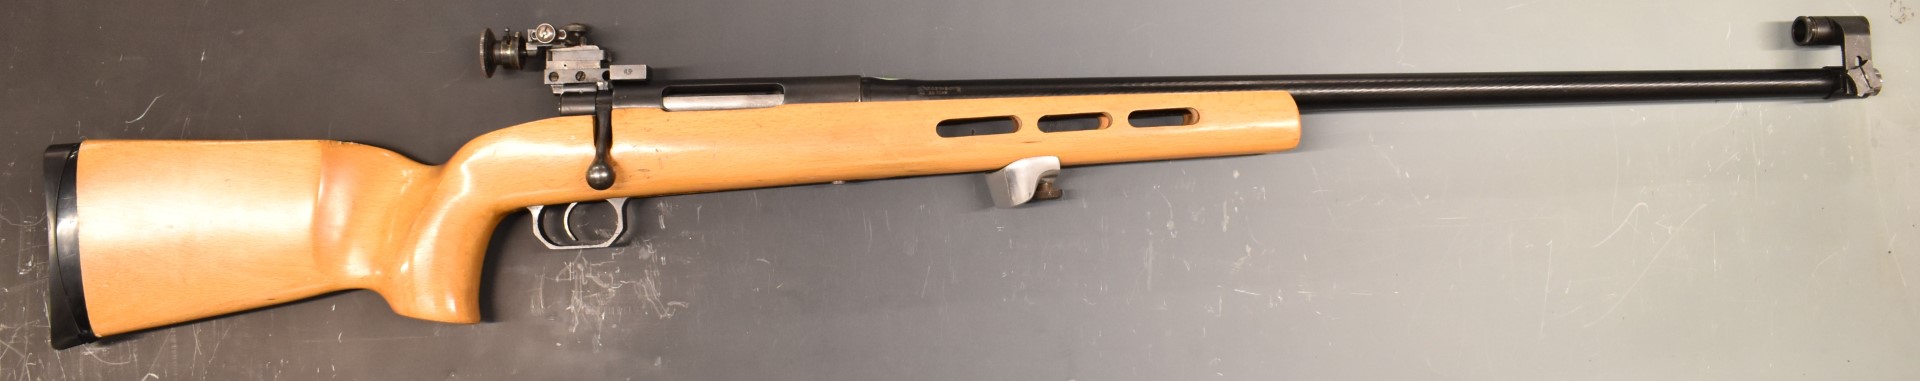 Musgrave 7.62mm bolt-action target rifle with semi-pistol grip, raised cheek piece, adjustable AJP - Image 2 of 4